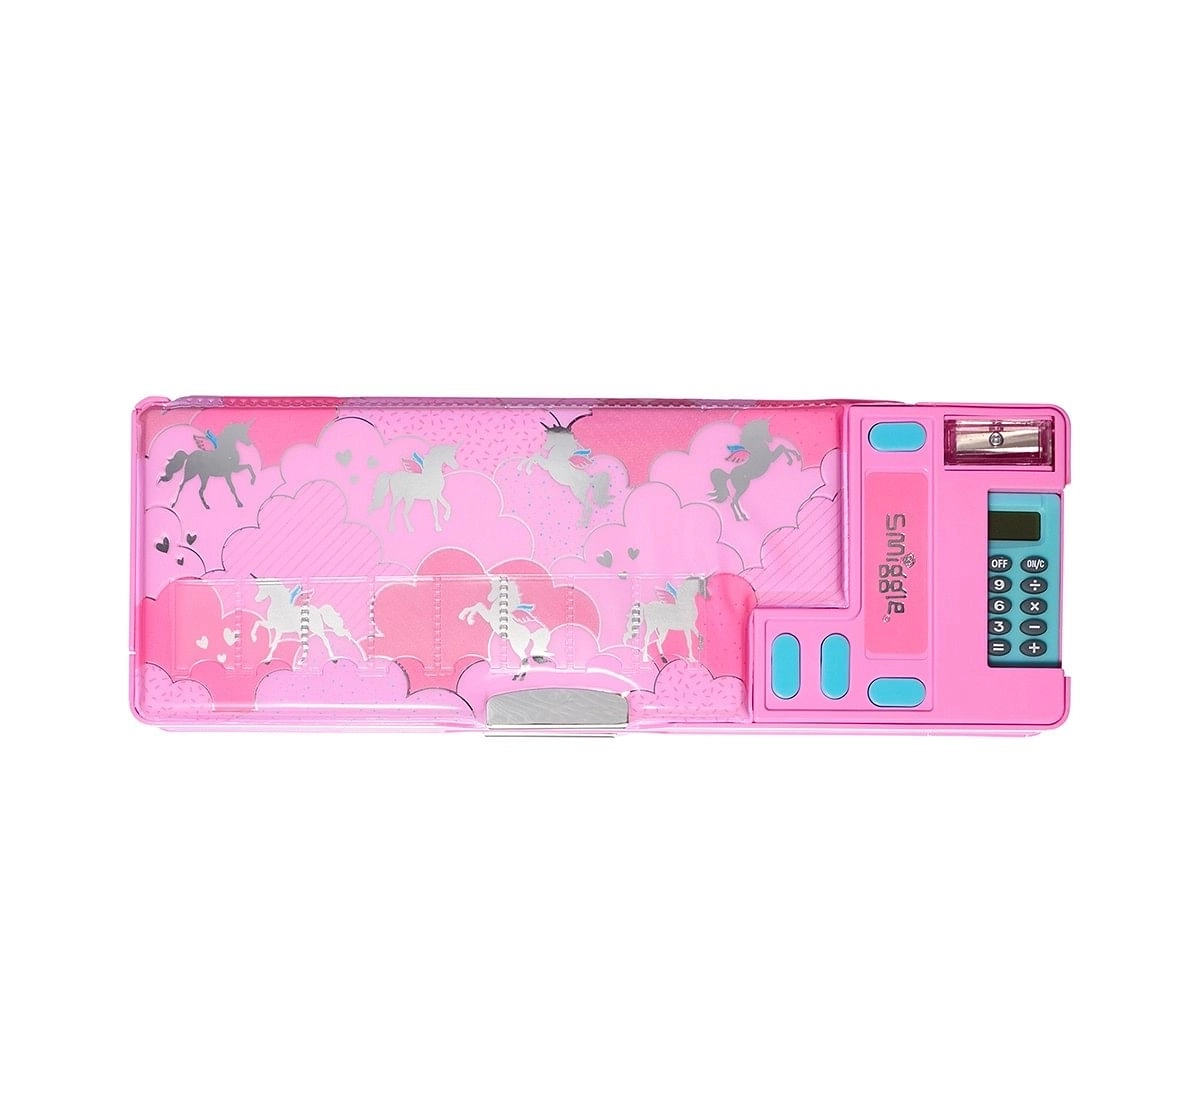 Smiggle Lunar Pop Out Pencil Case - Unicorn Print Bags for Kids age 6Y+ (Pink)